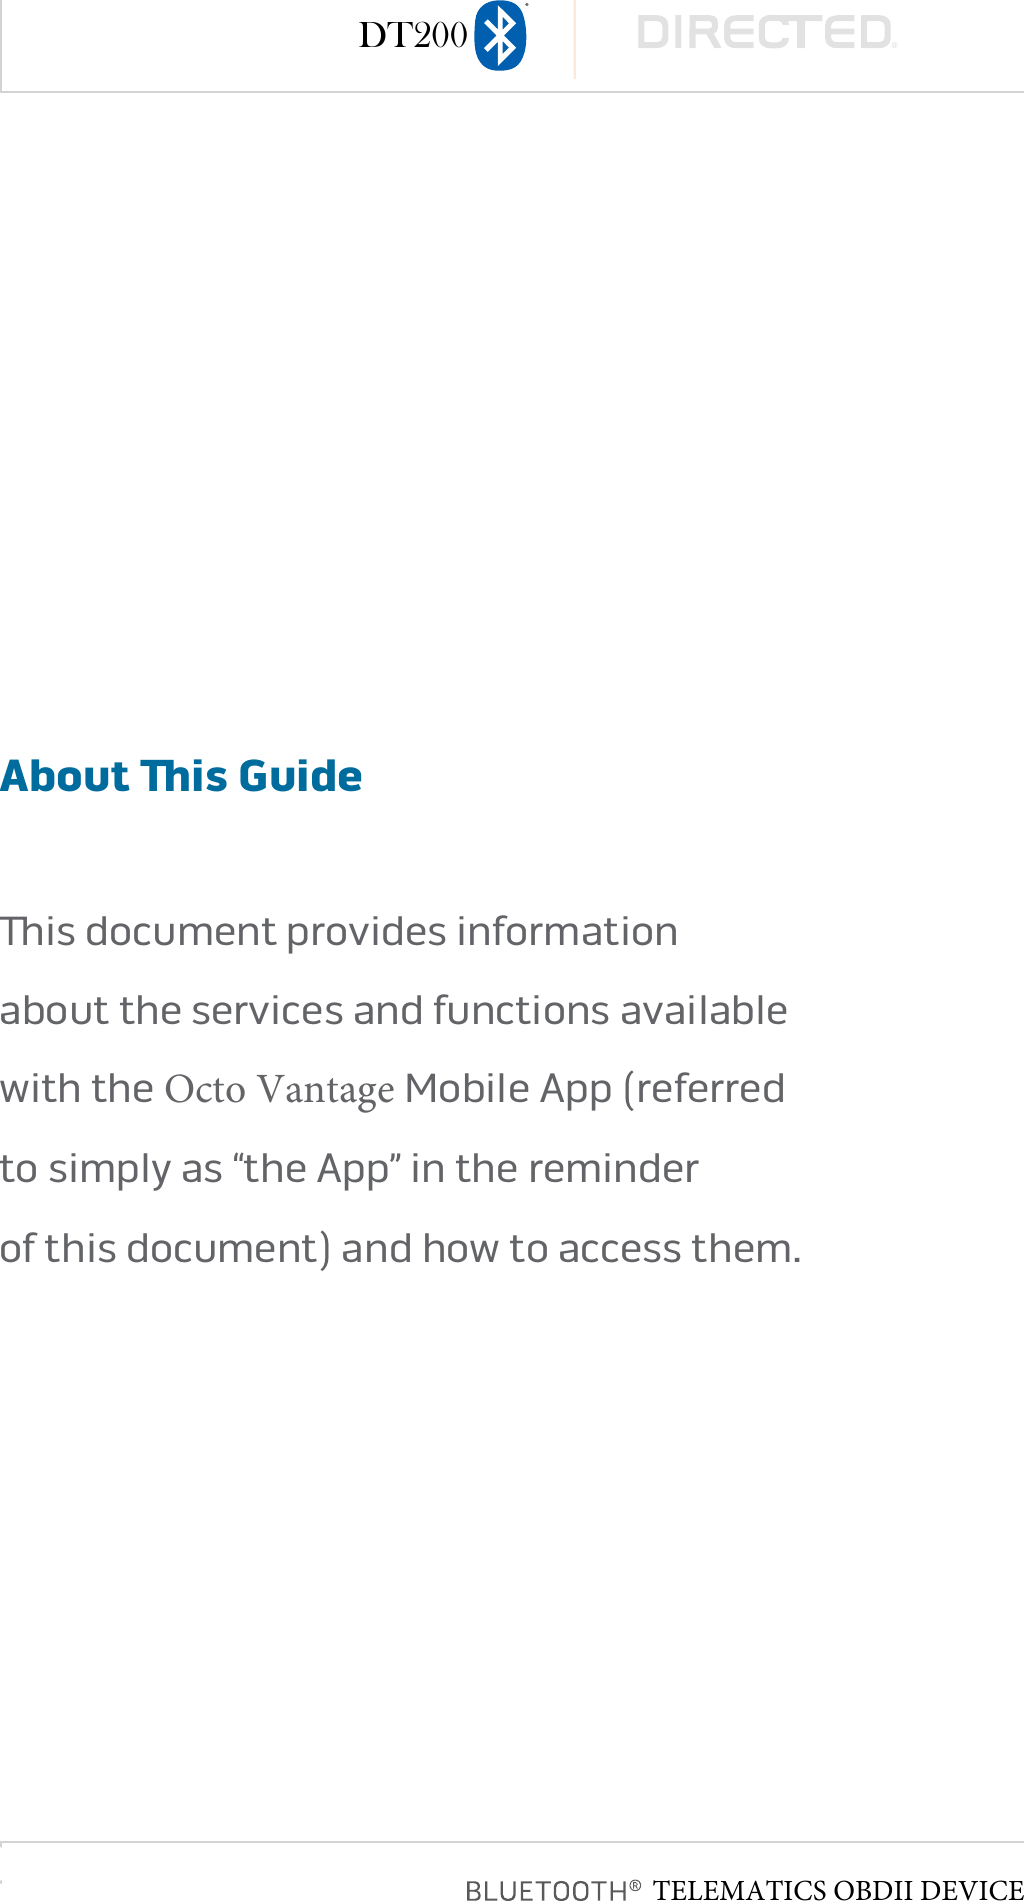 page 3About is Guideis document provides information  about the services and functions available  with the Octo Vantage Mobile App (referred  to simply as “the App” in the reminder  of this document) and how to access them�TELEMATICS OBDII DEVICEDT200